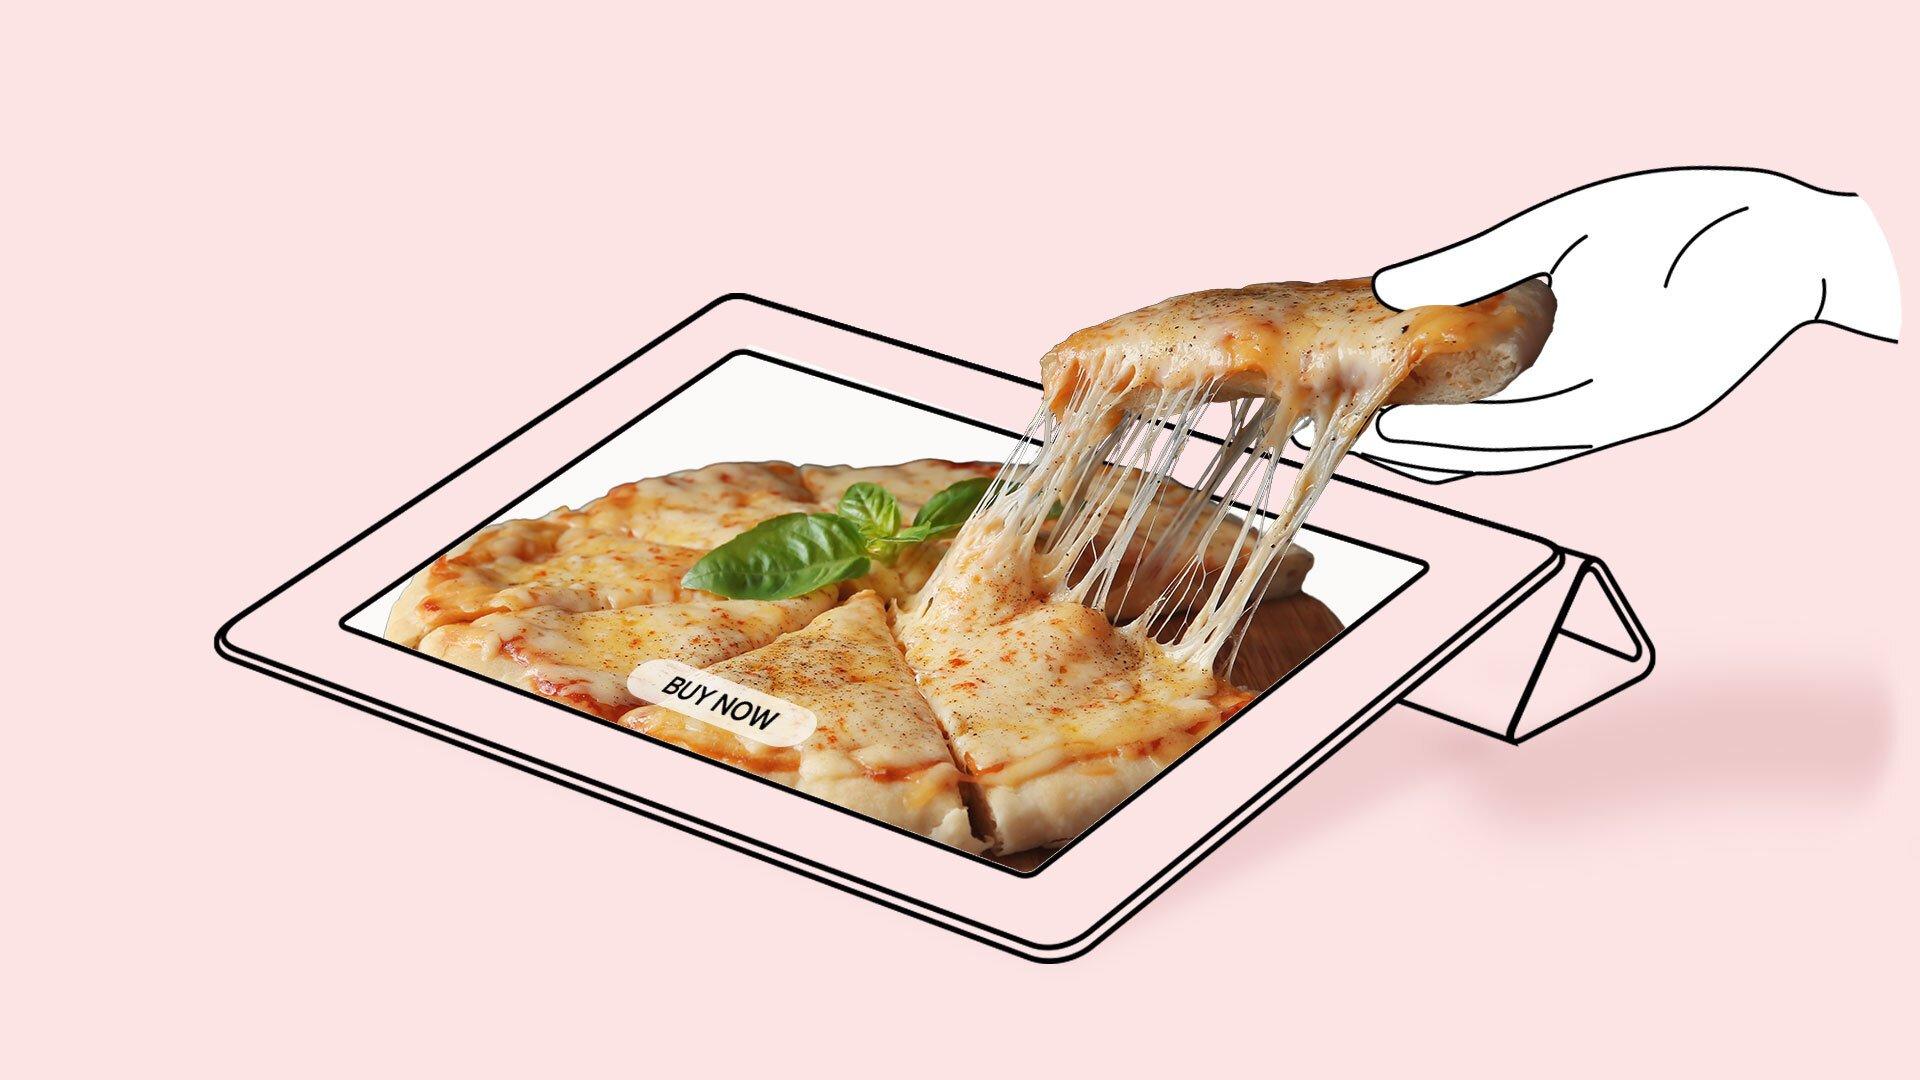 A hand picks up a slice of cheese pizza from a tablet that reads buy now